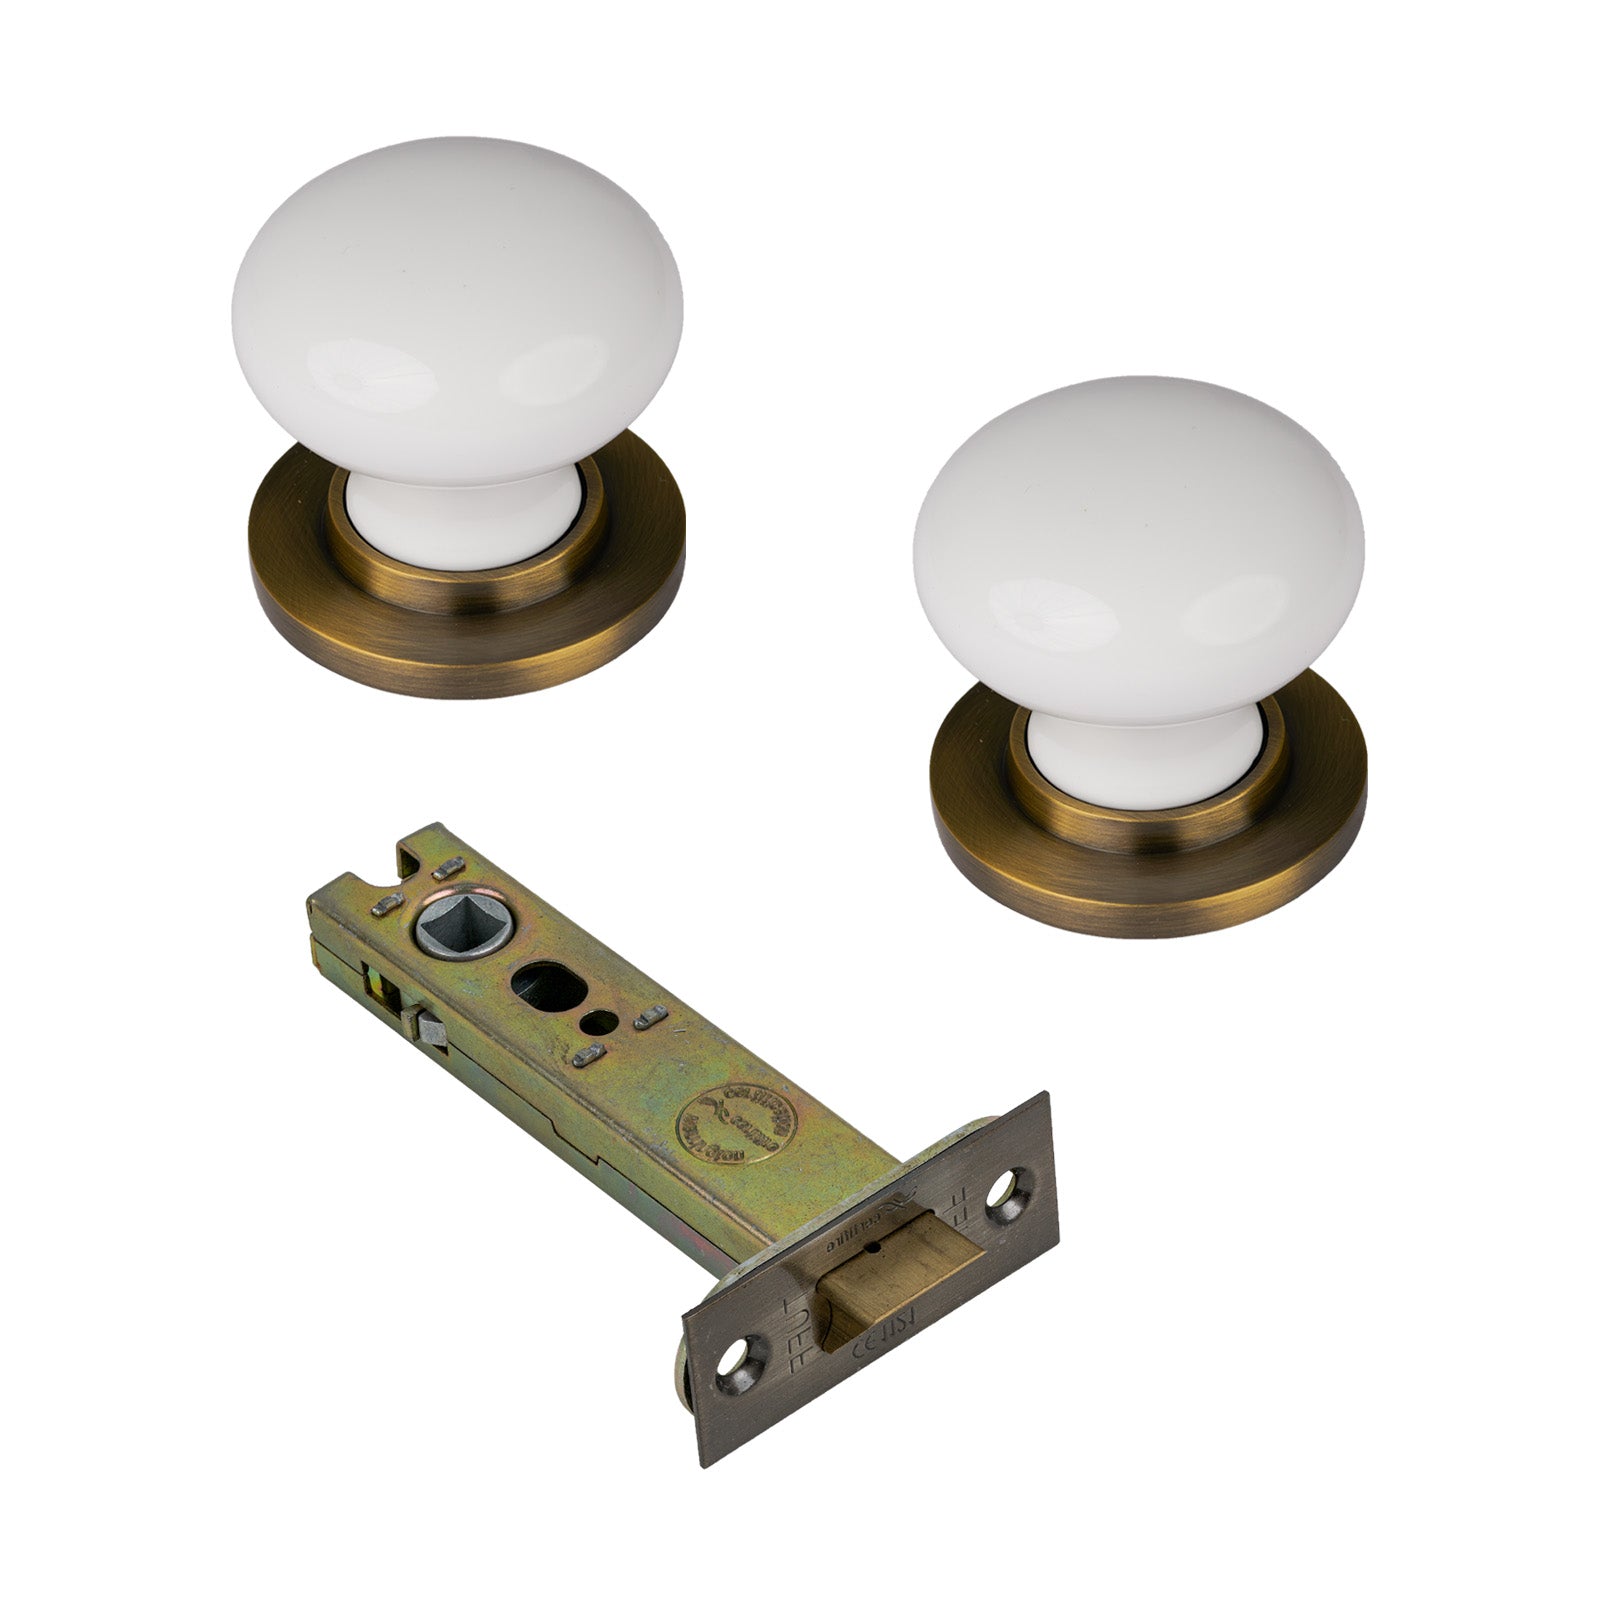 SHOW Plain White Porcelain Door Knob with Aged Brass Rose with 4 inch latch